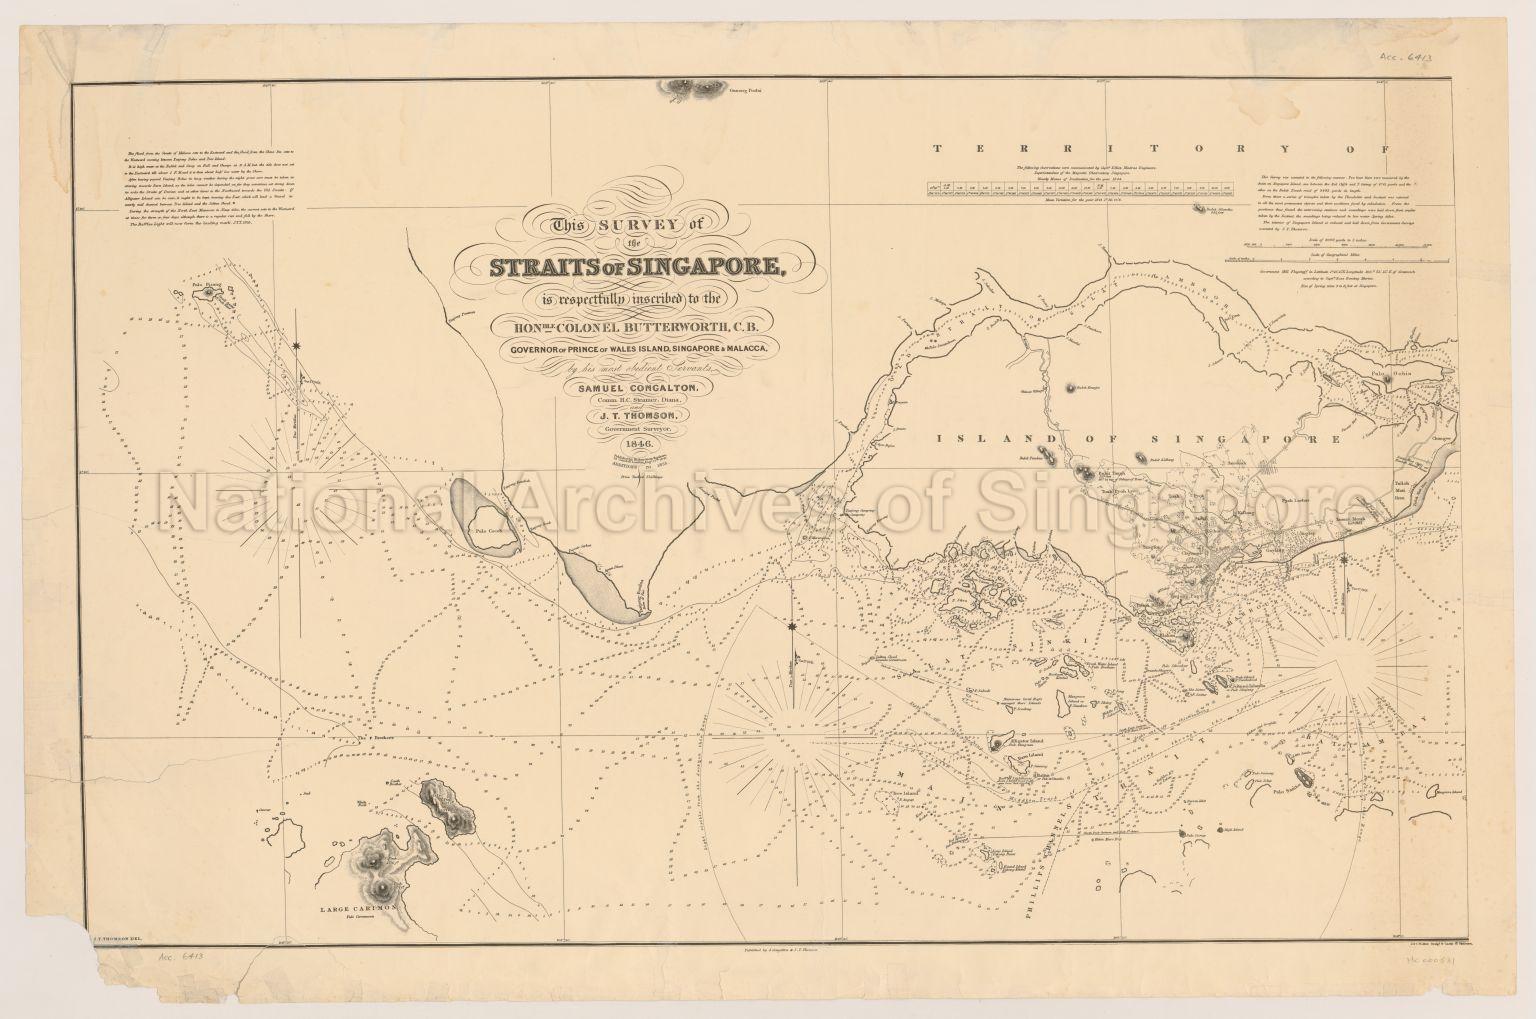 This Survey Of The Straits Of Singapore, Is Respectfully  …